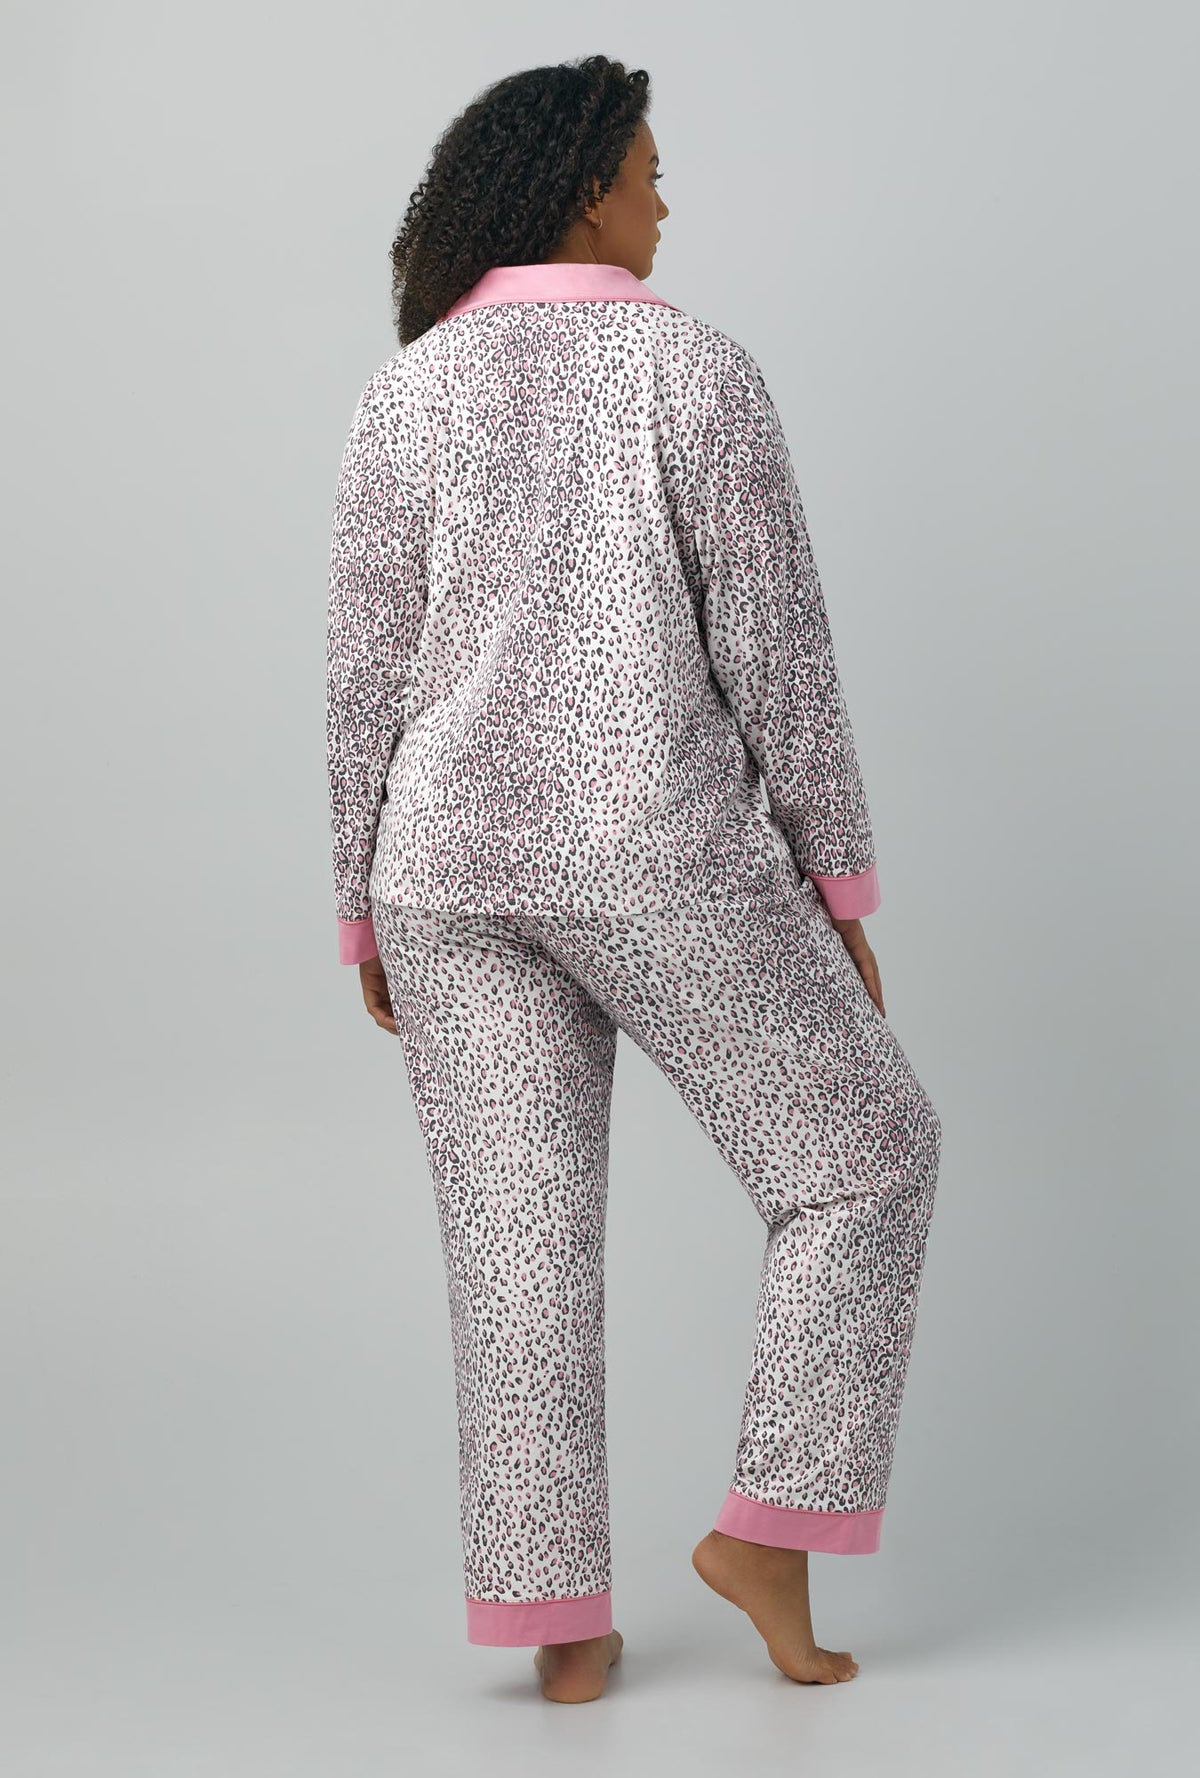 A lady wearing Long Sleeve Classic Stretch Jersey PJ Set with spa kitten print